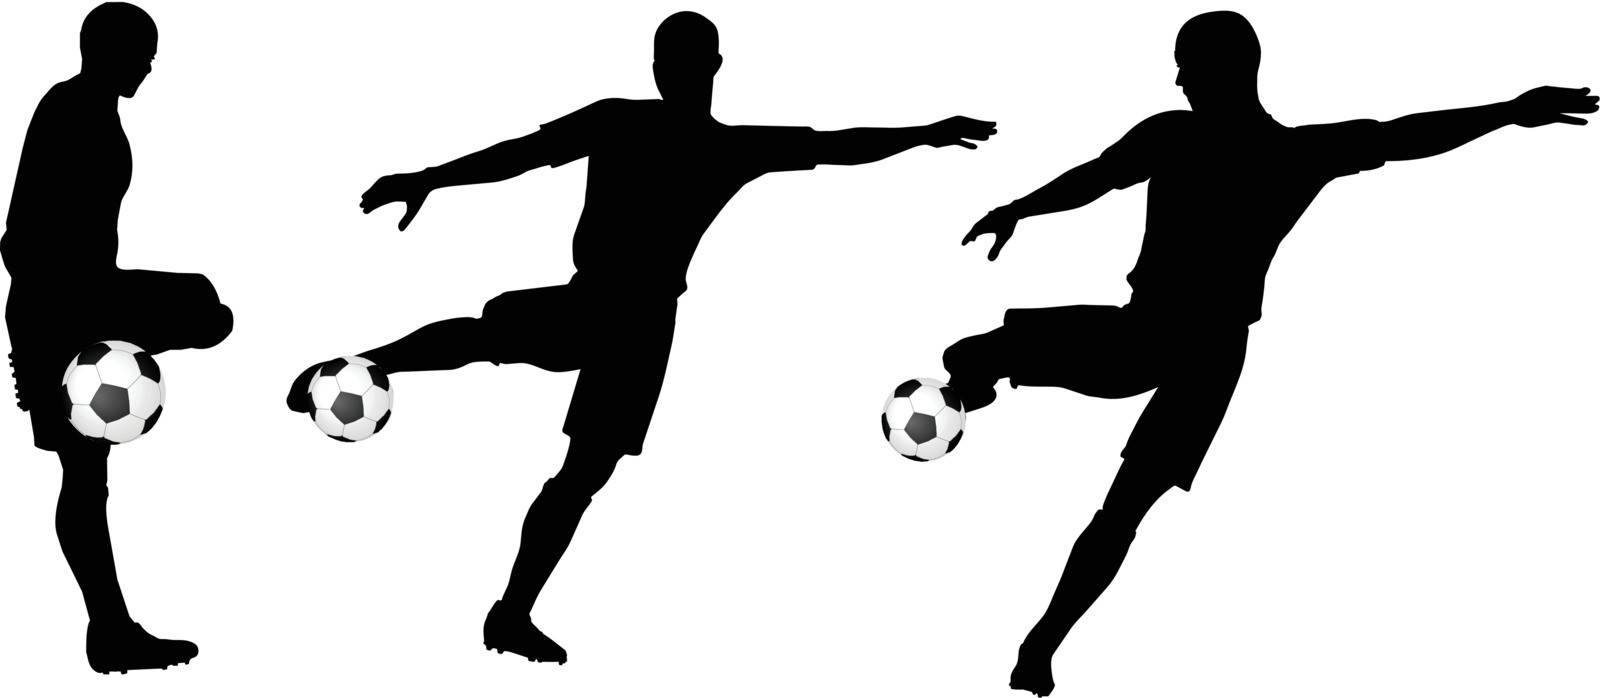 poses of soccer players silhouettes in run and strike position by Istanbul2009